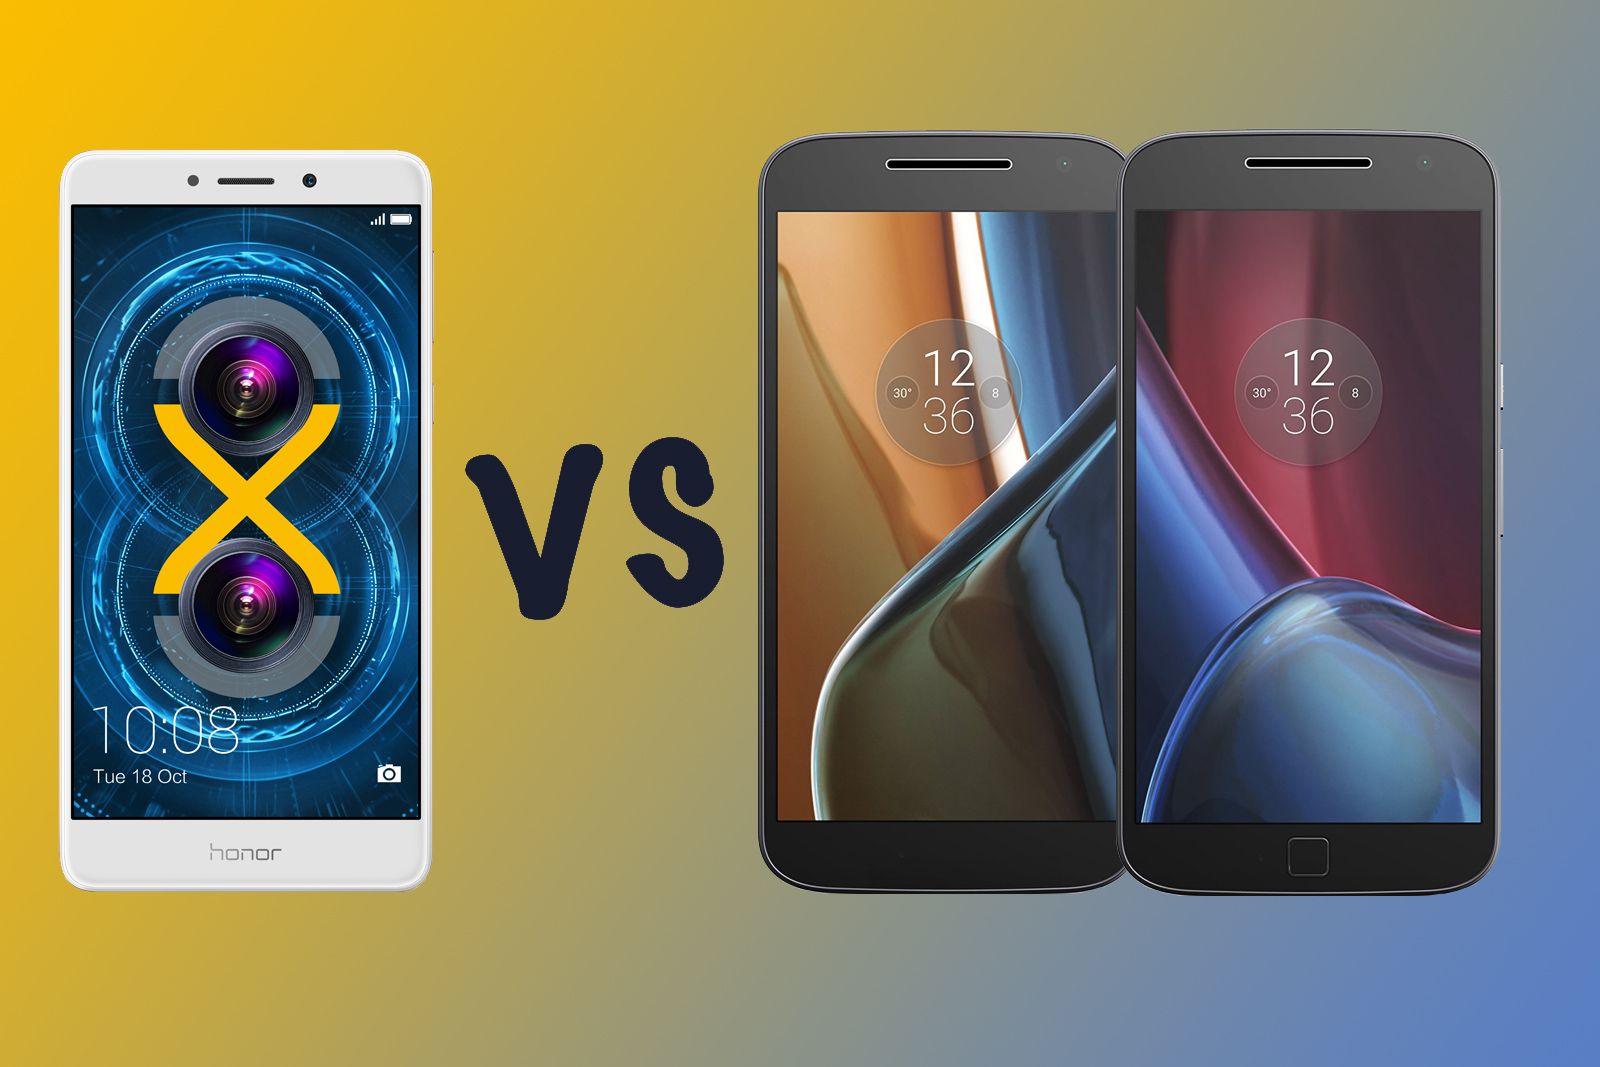 honor 6x vs moto g4 vs moto g4 plus what s the difference  image 1